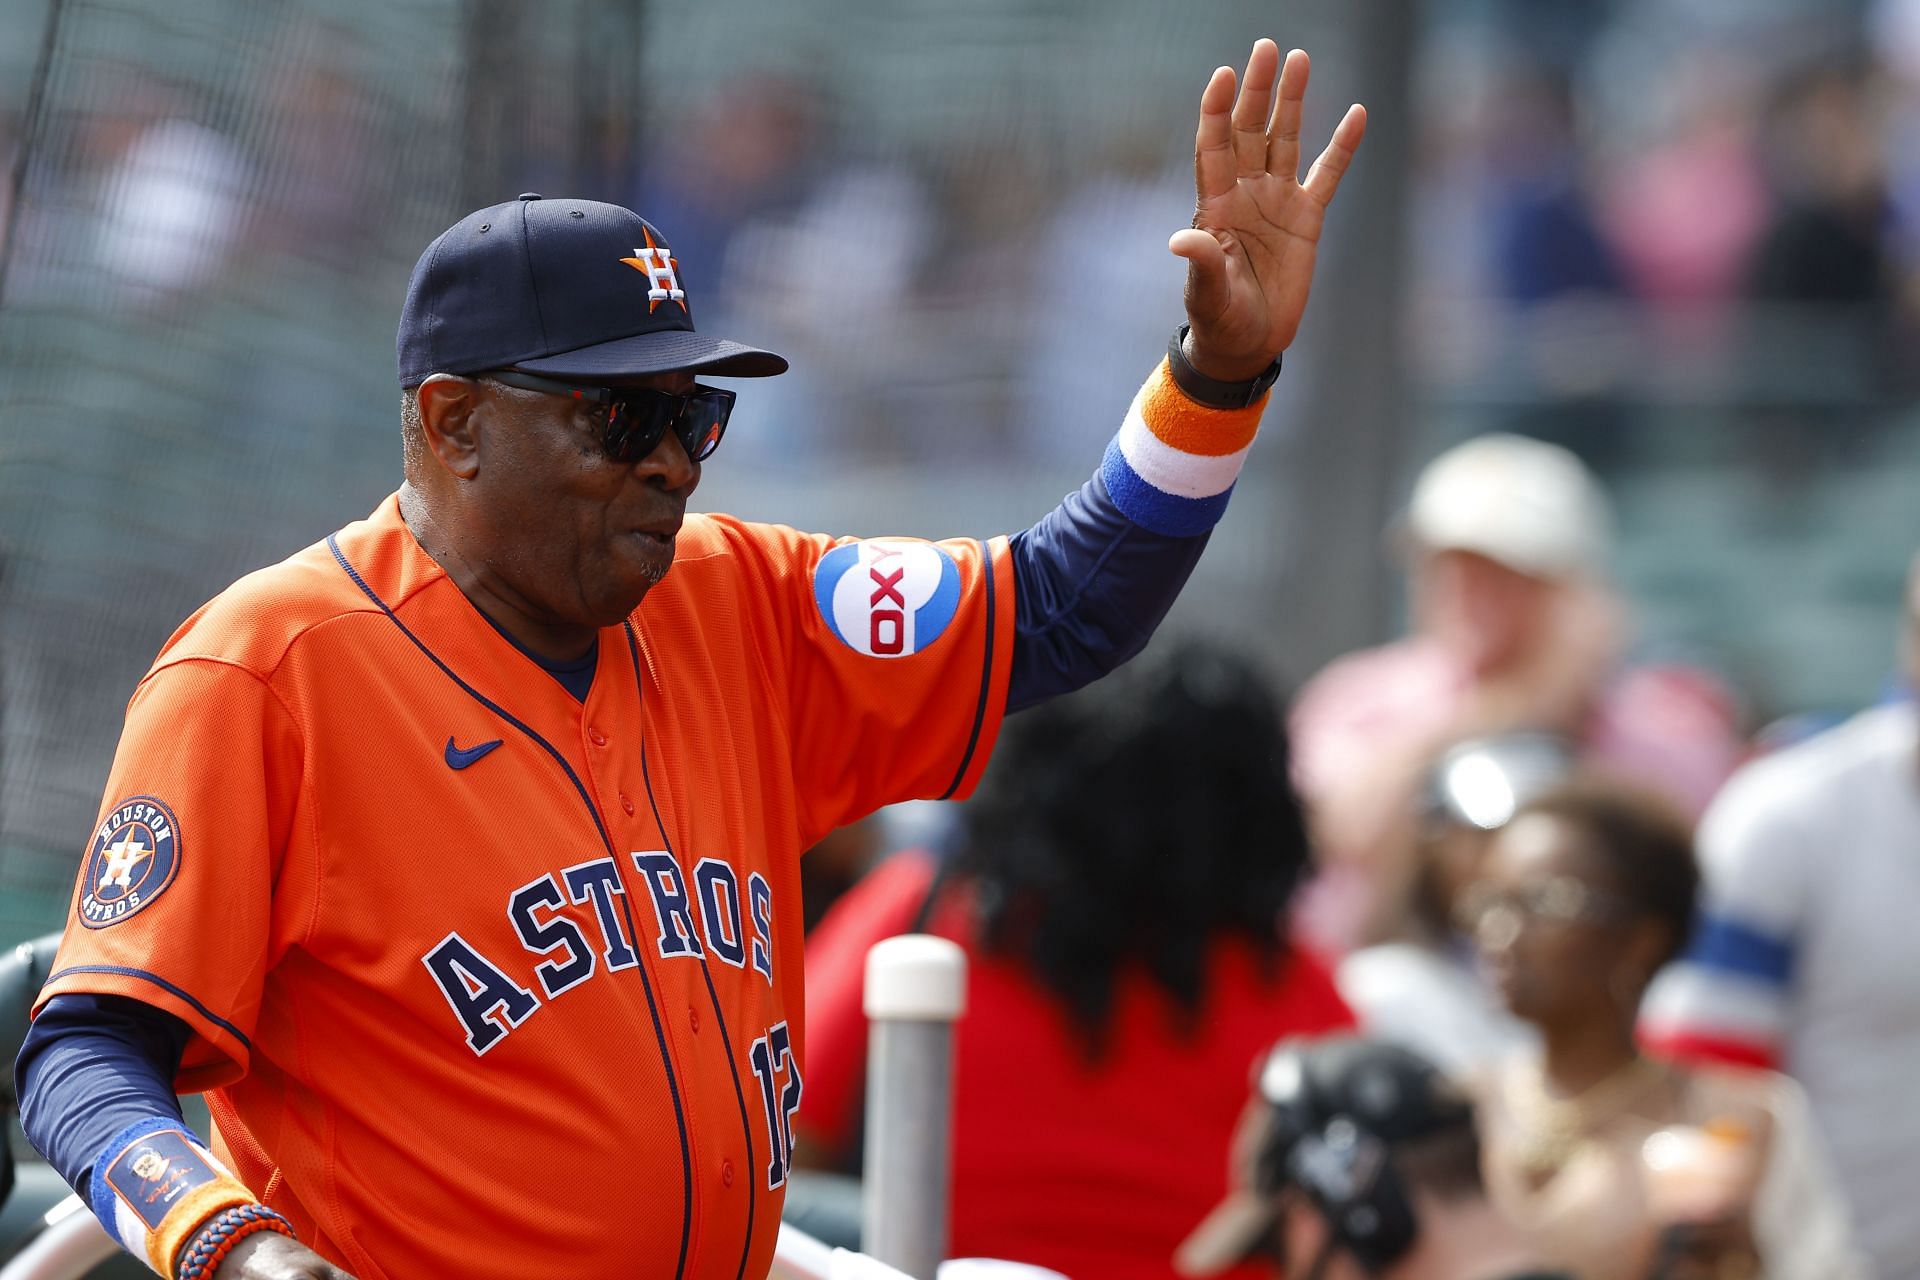 Manager Dusty Baker Jr. of the Houston Astros waves after defeating the Atlanta Braves at Truist Park